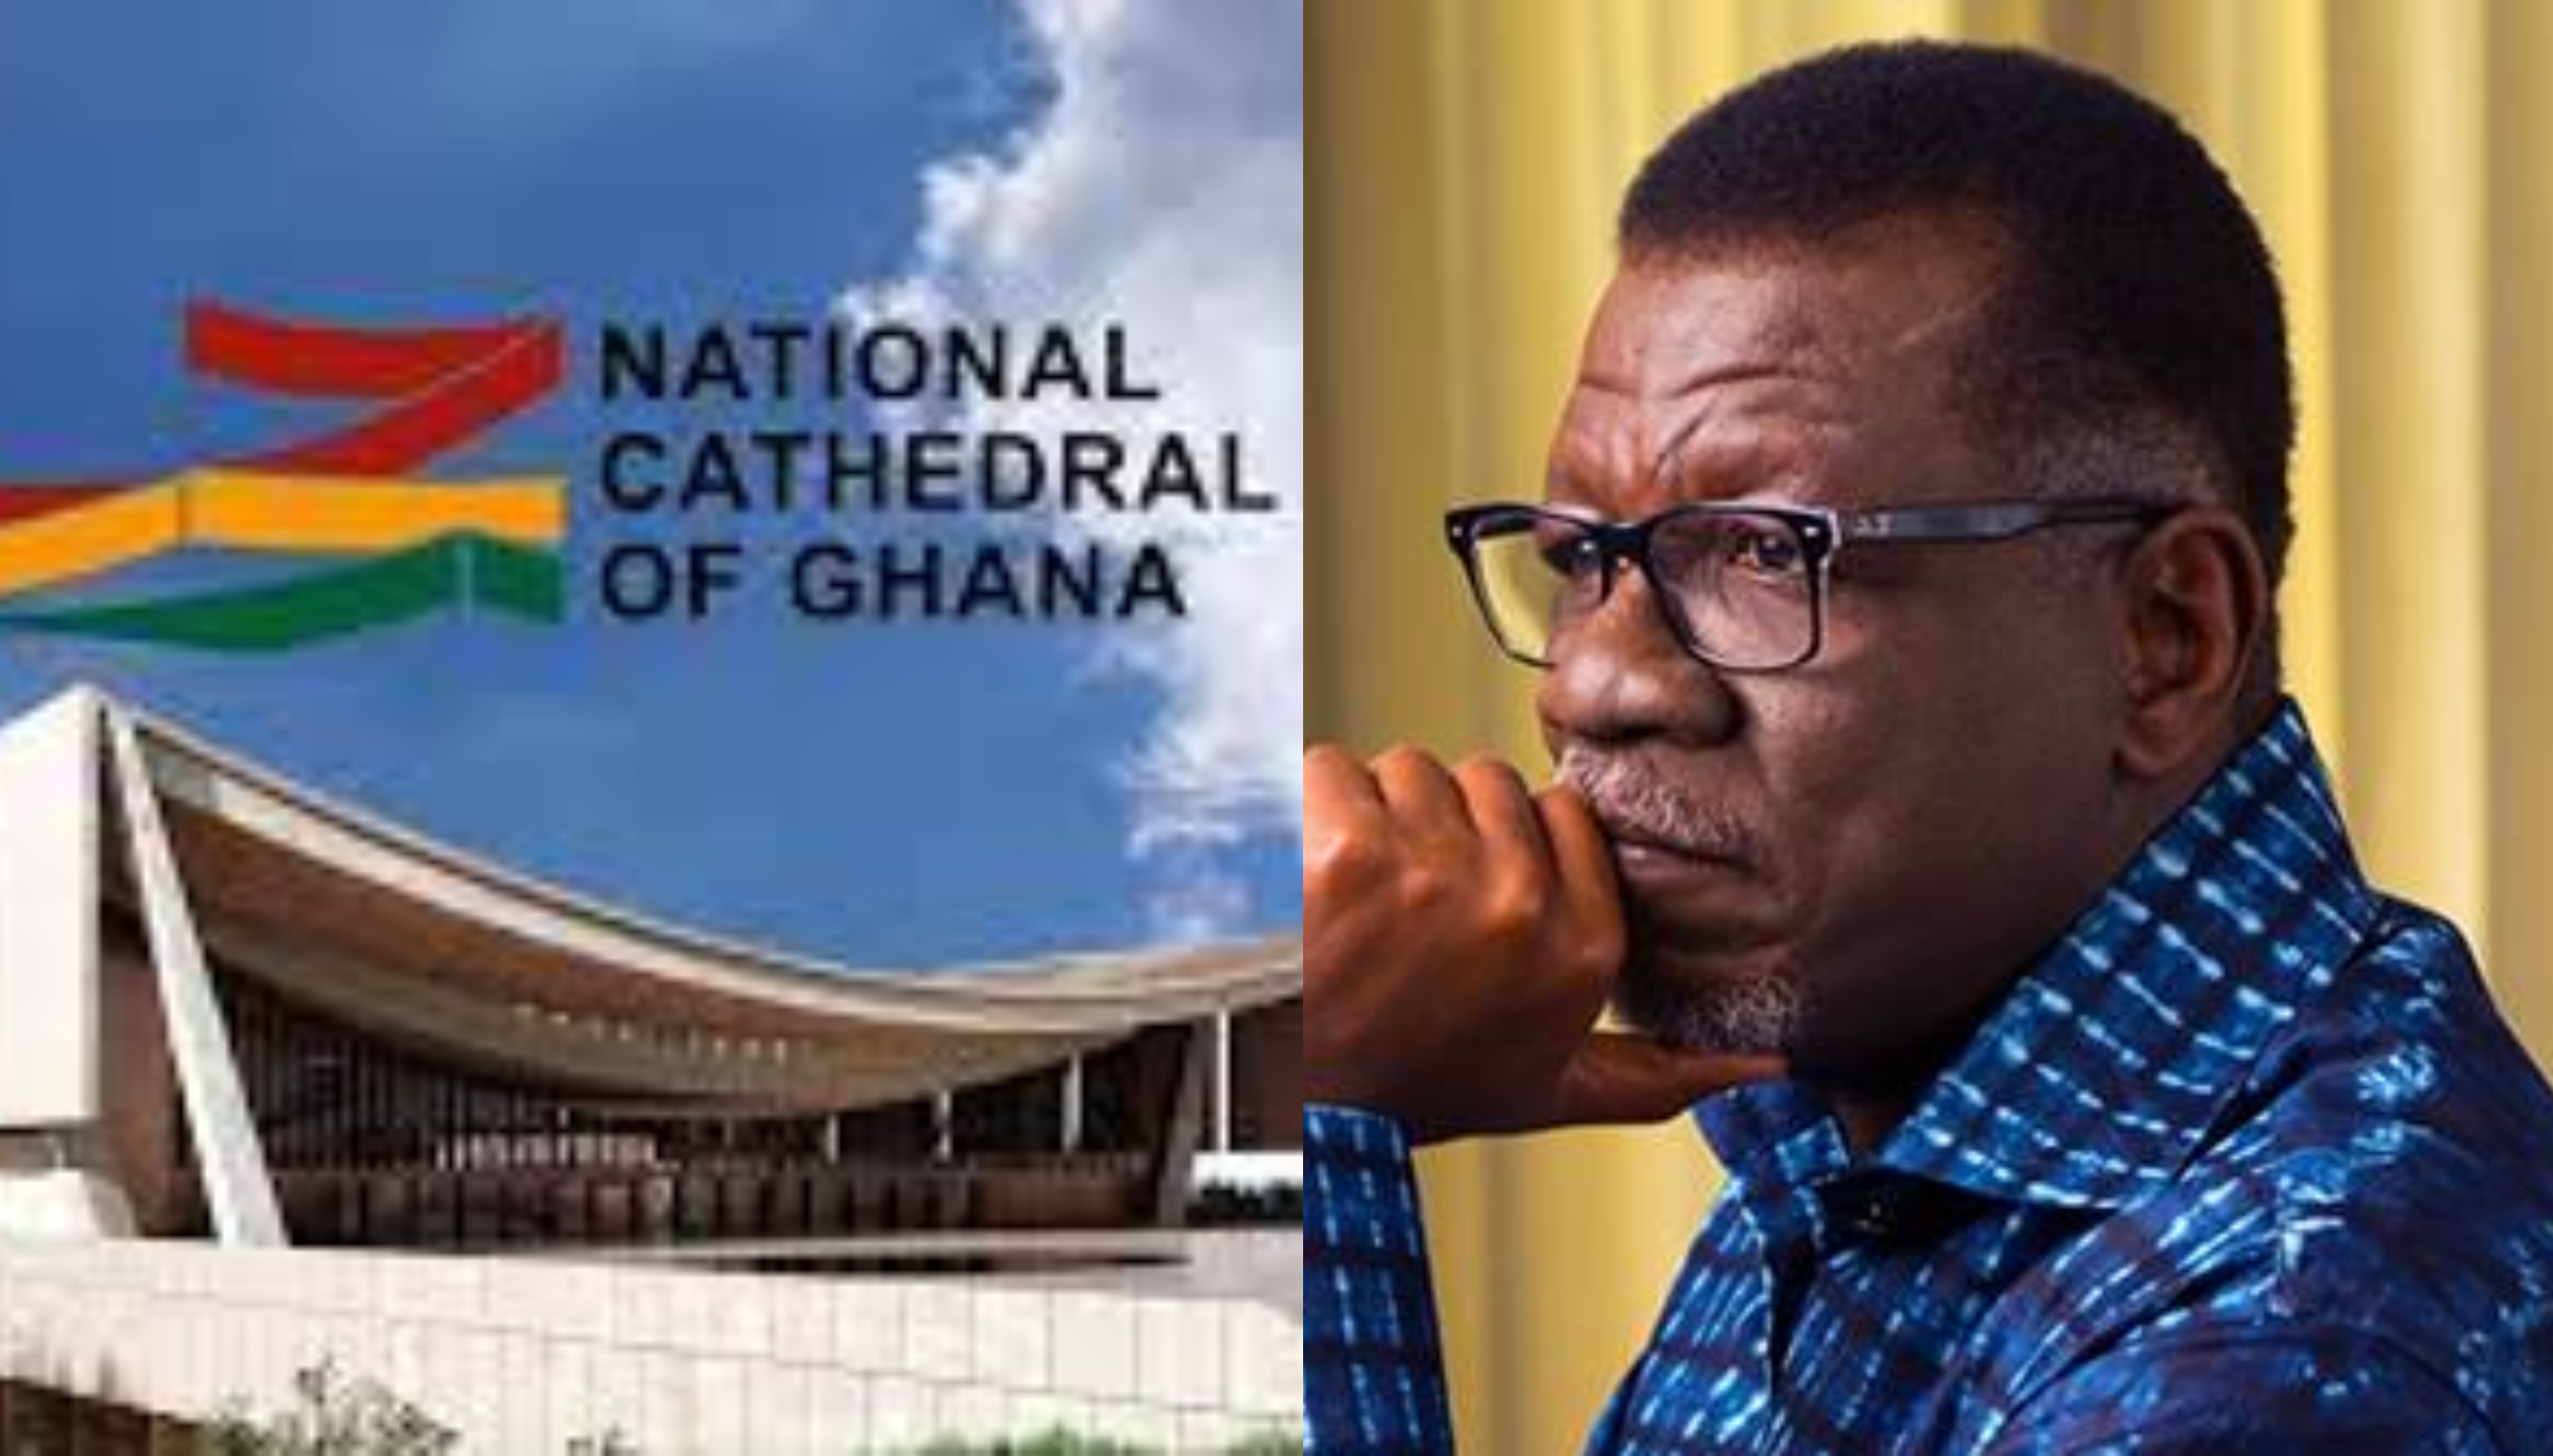 Otabil never resigned, he excused himself - National Cathedral Secretariat says